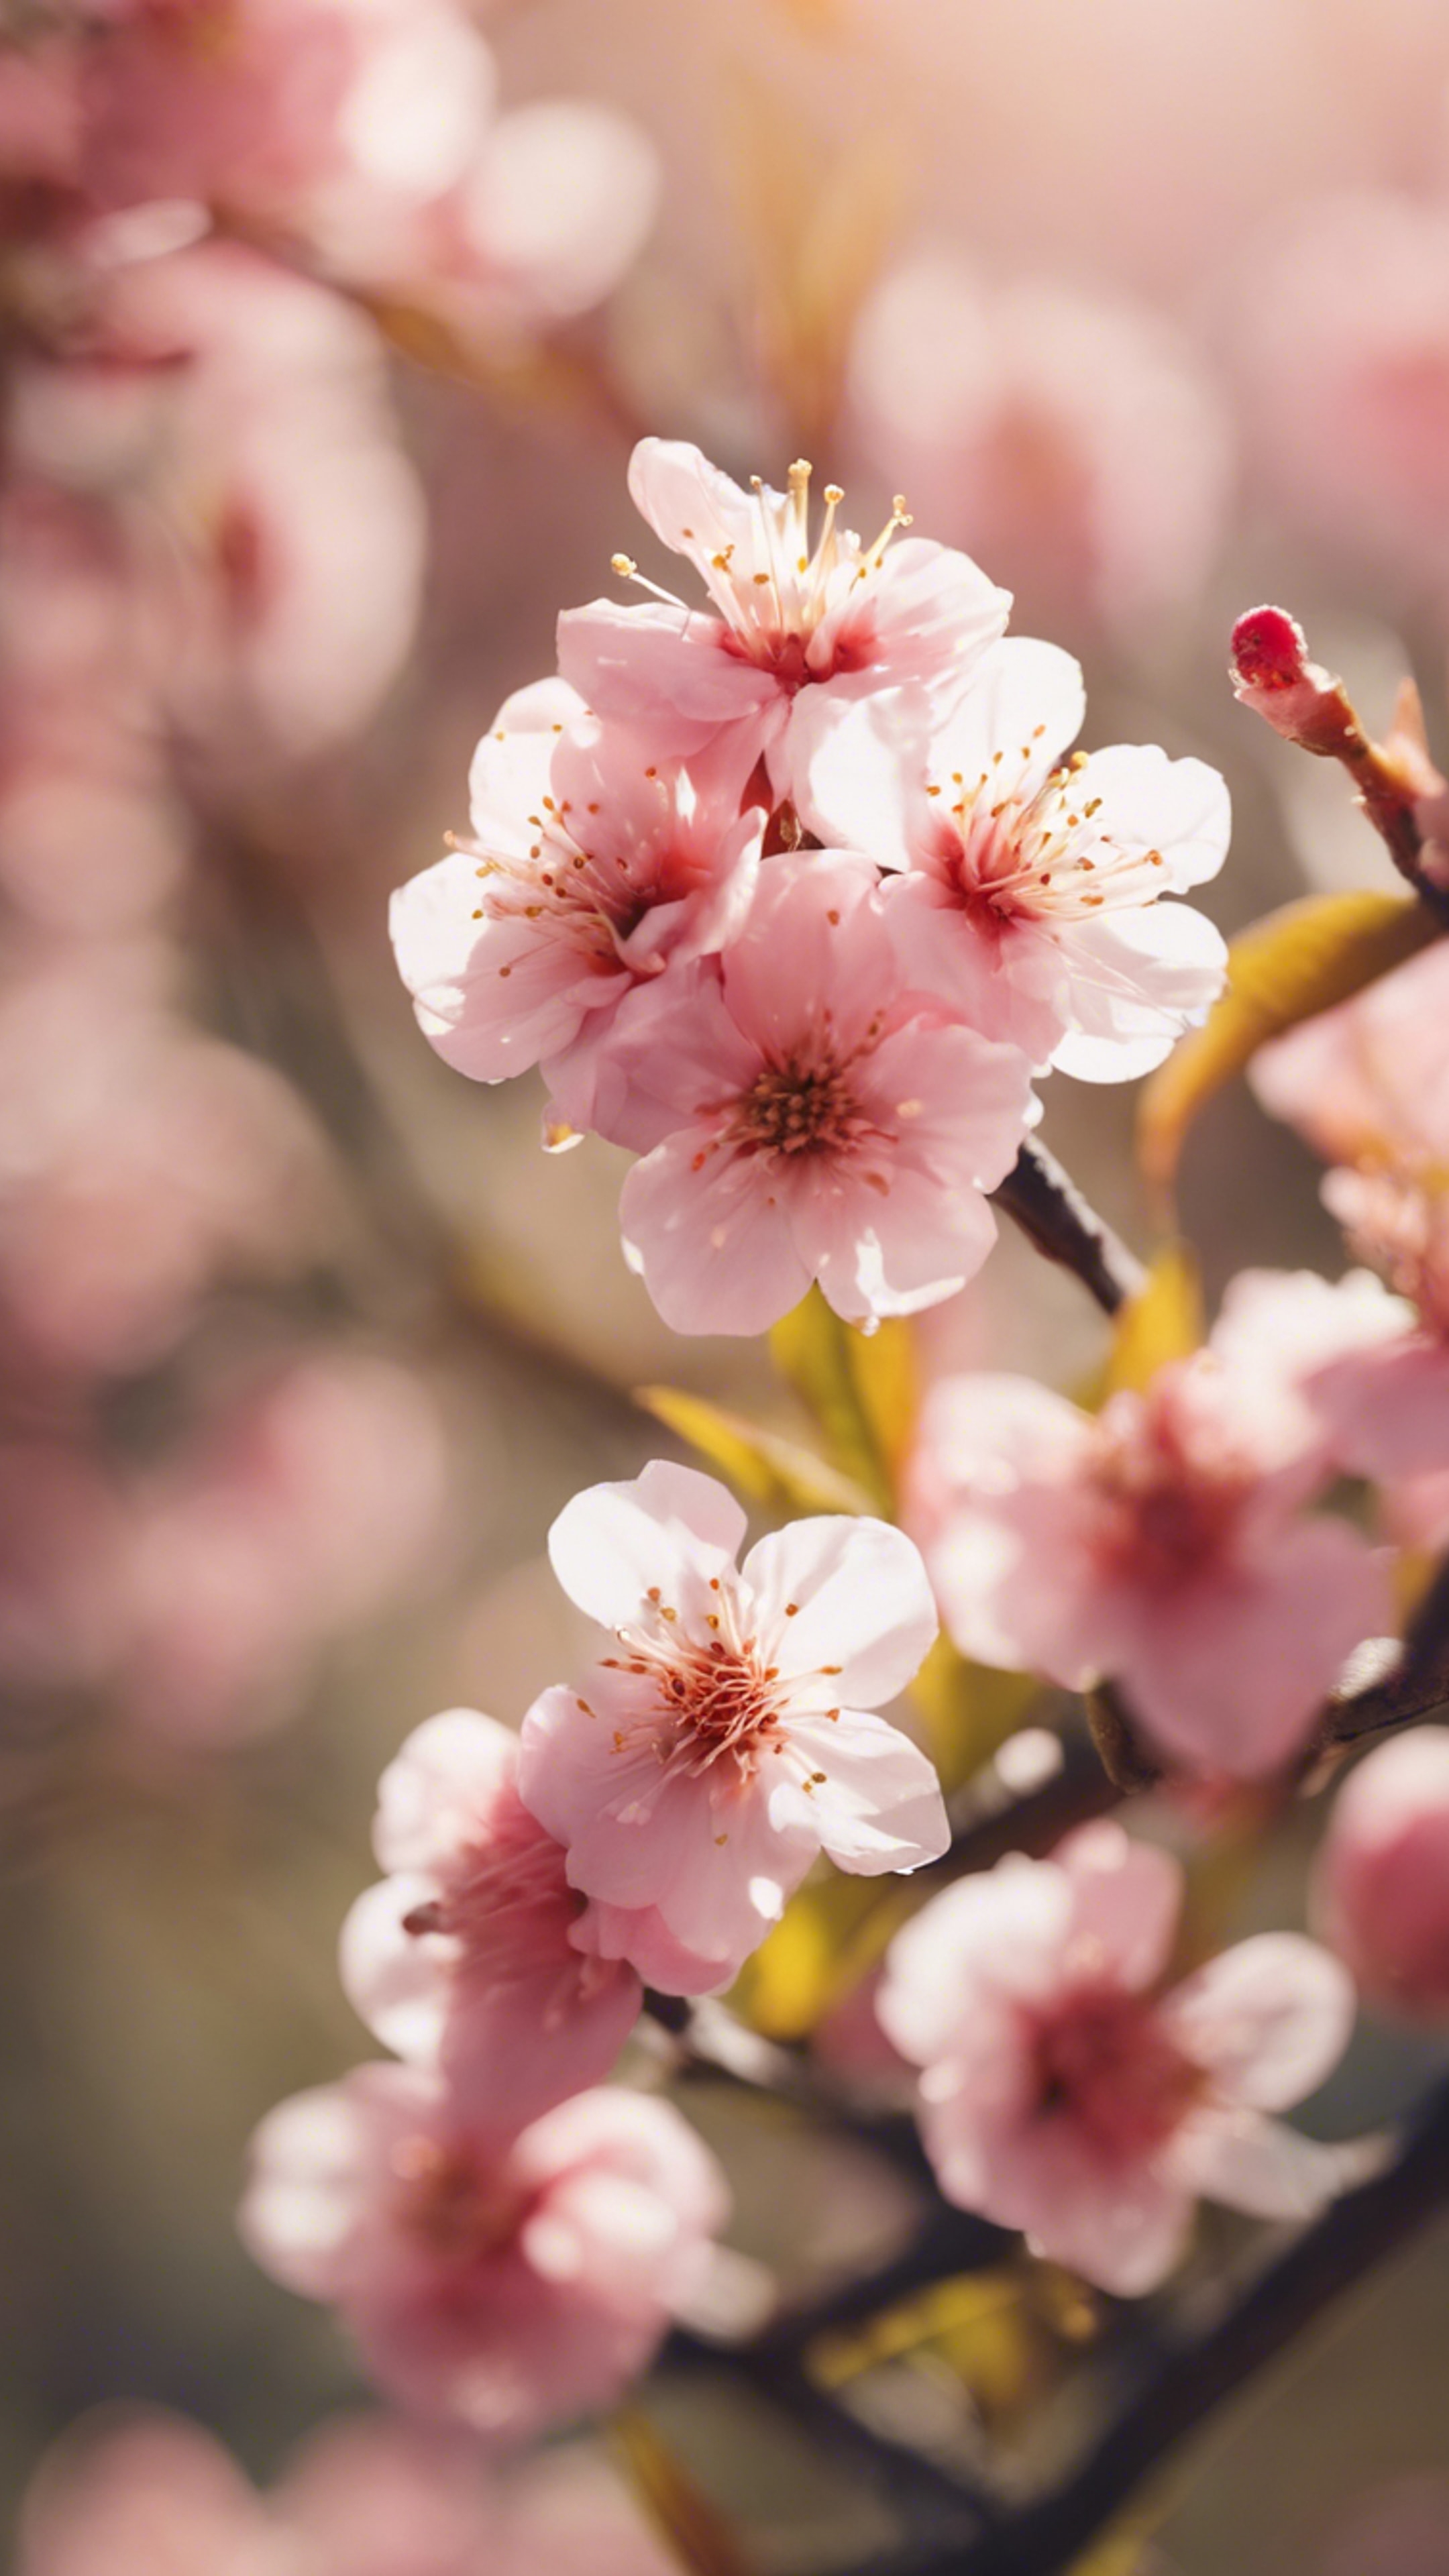 A close-up of happy peach flowers blooming cheerfully on a sunny spring day.壁紙[9ab03d009b524efe8bfb]